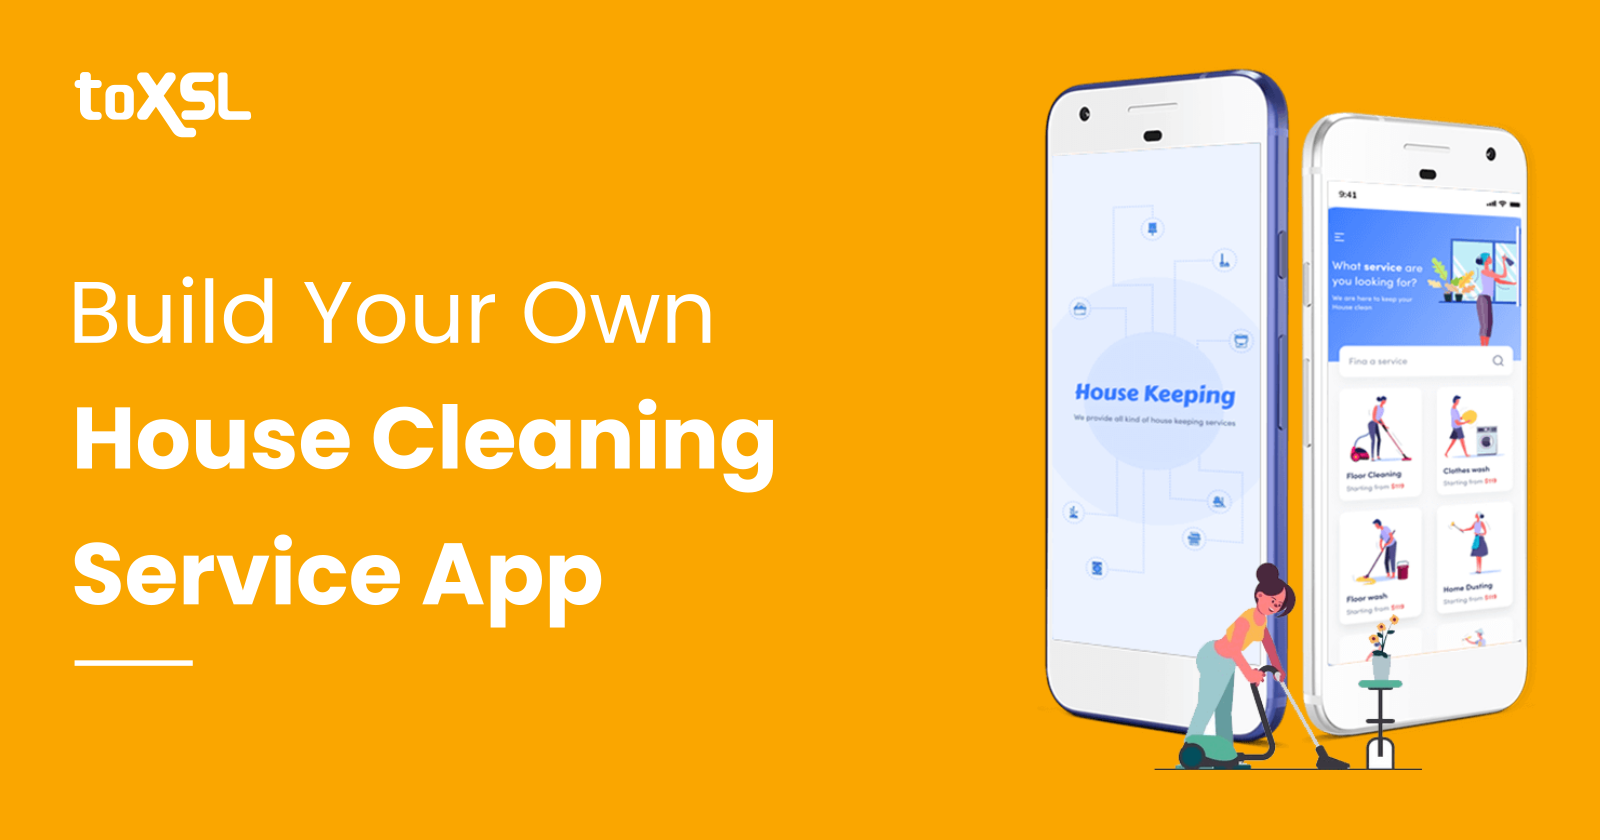 Things You Need To Know Before Creating A On-demand House Cleaning App